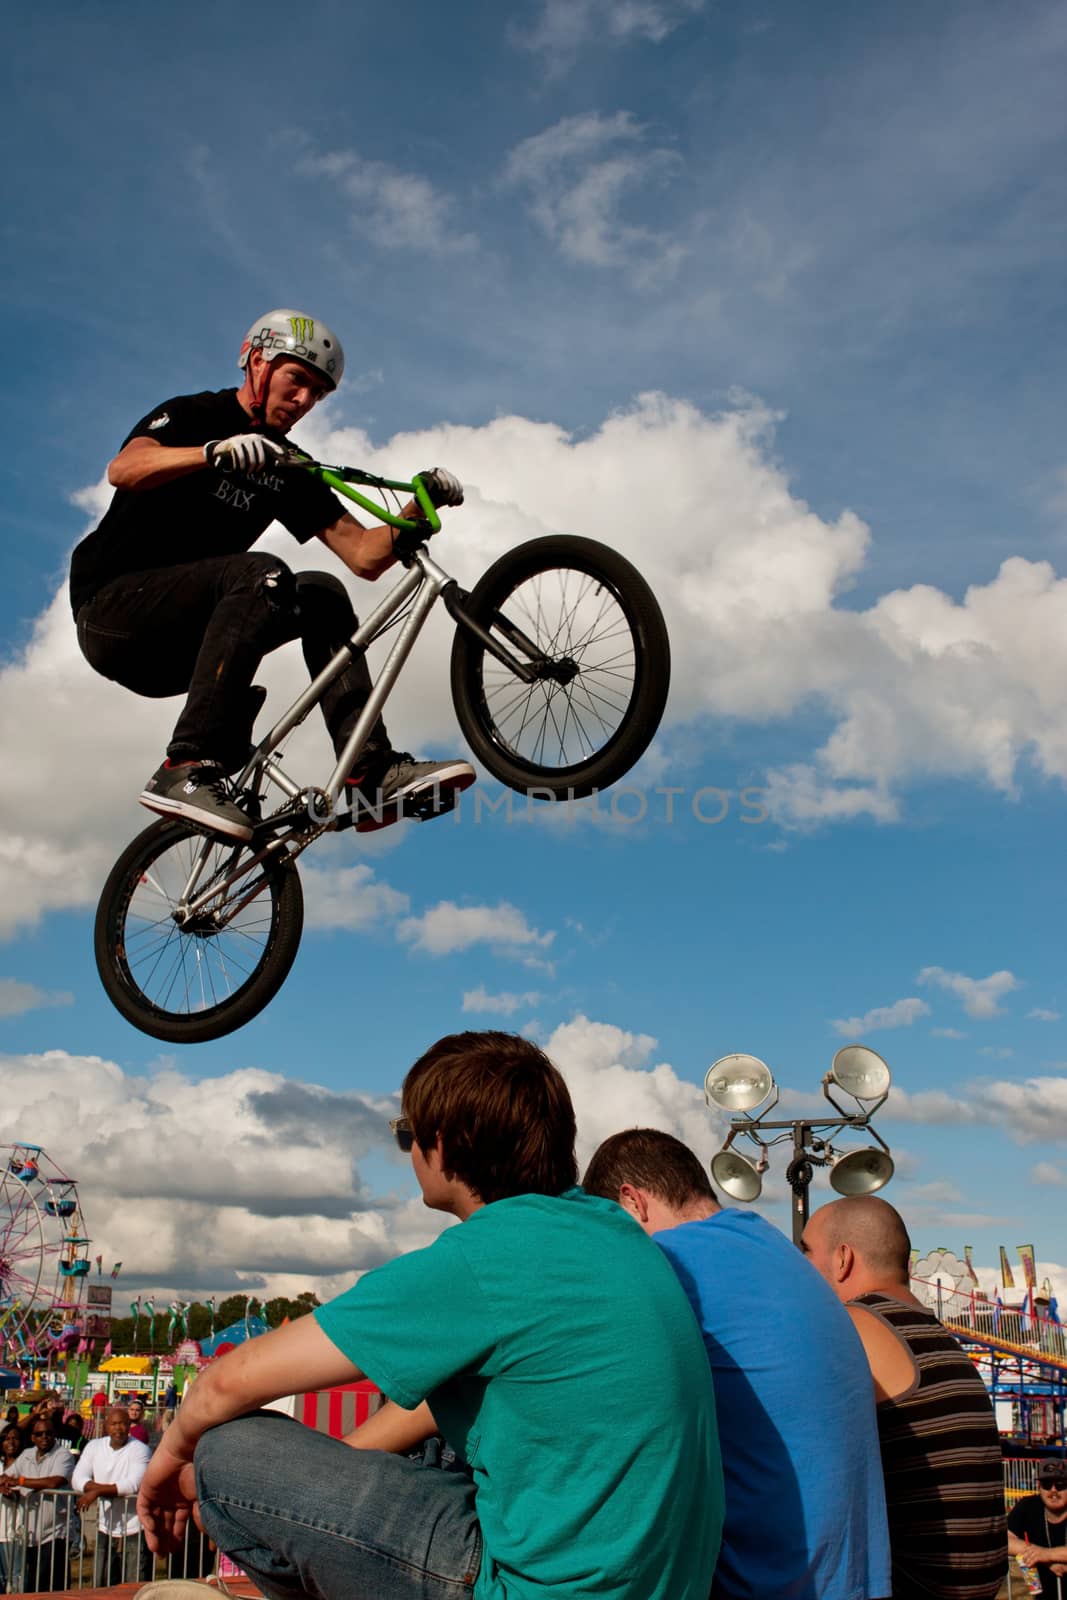 BMX Rider Performs Stunt Over Three Audience Members At Fair by BluIz60